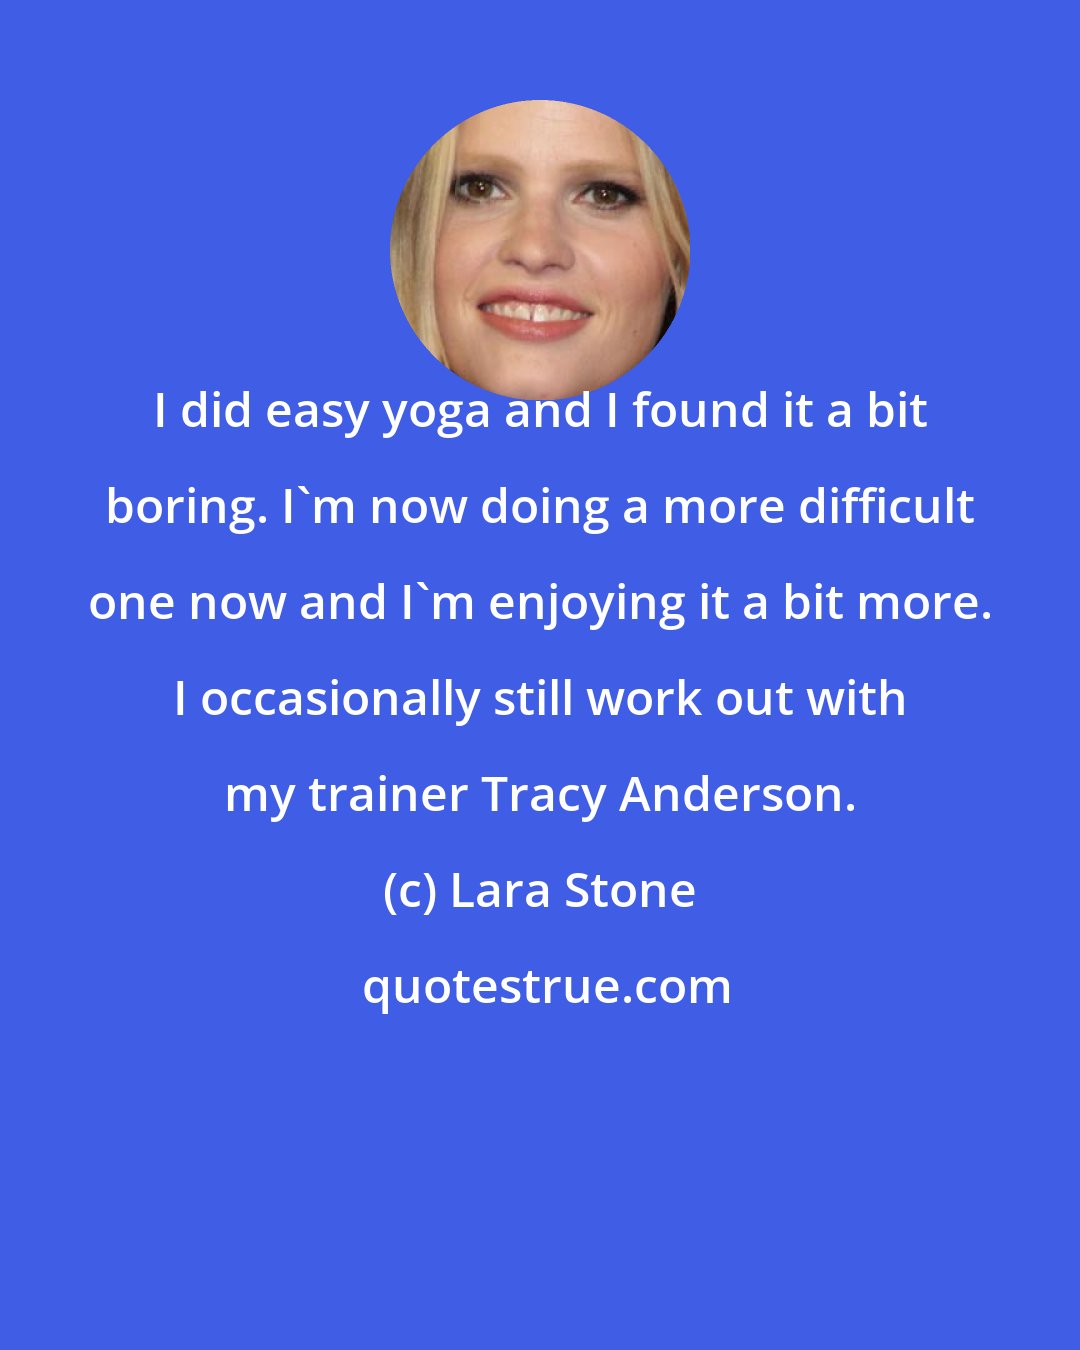 Lara Stone: I did easy yoga and I found it a bit boring. I'm now doing a more difficult one now and I'm enjoying it a bit more. I occasionally still work out with my trainer Tracy Anderson.